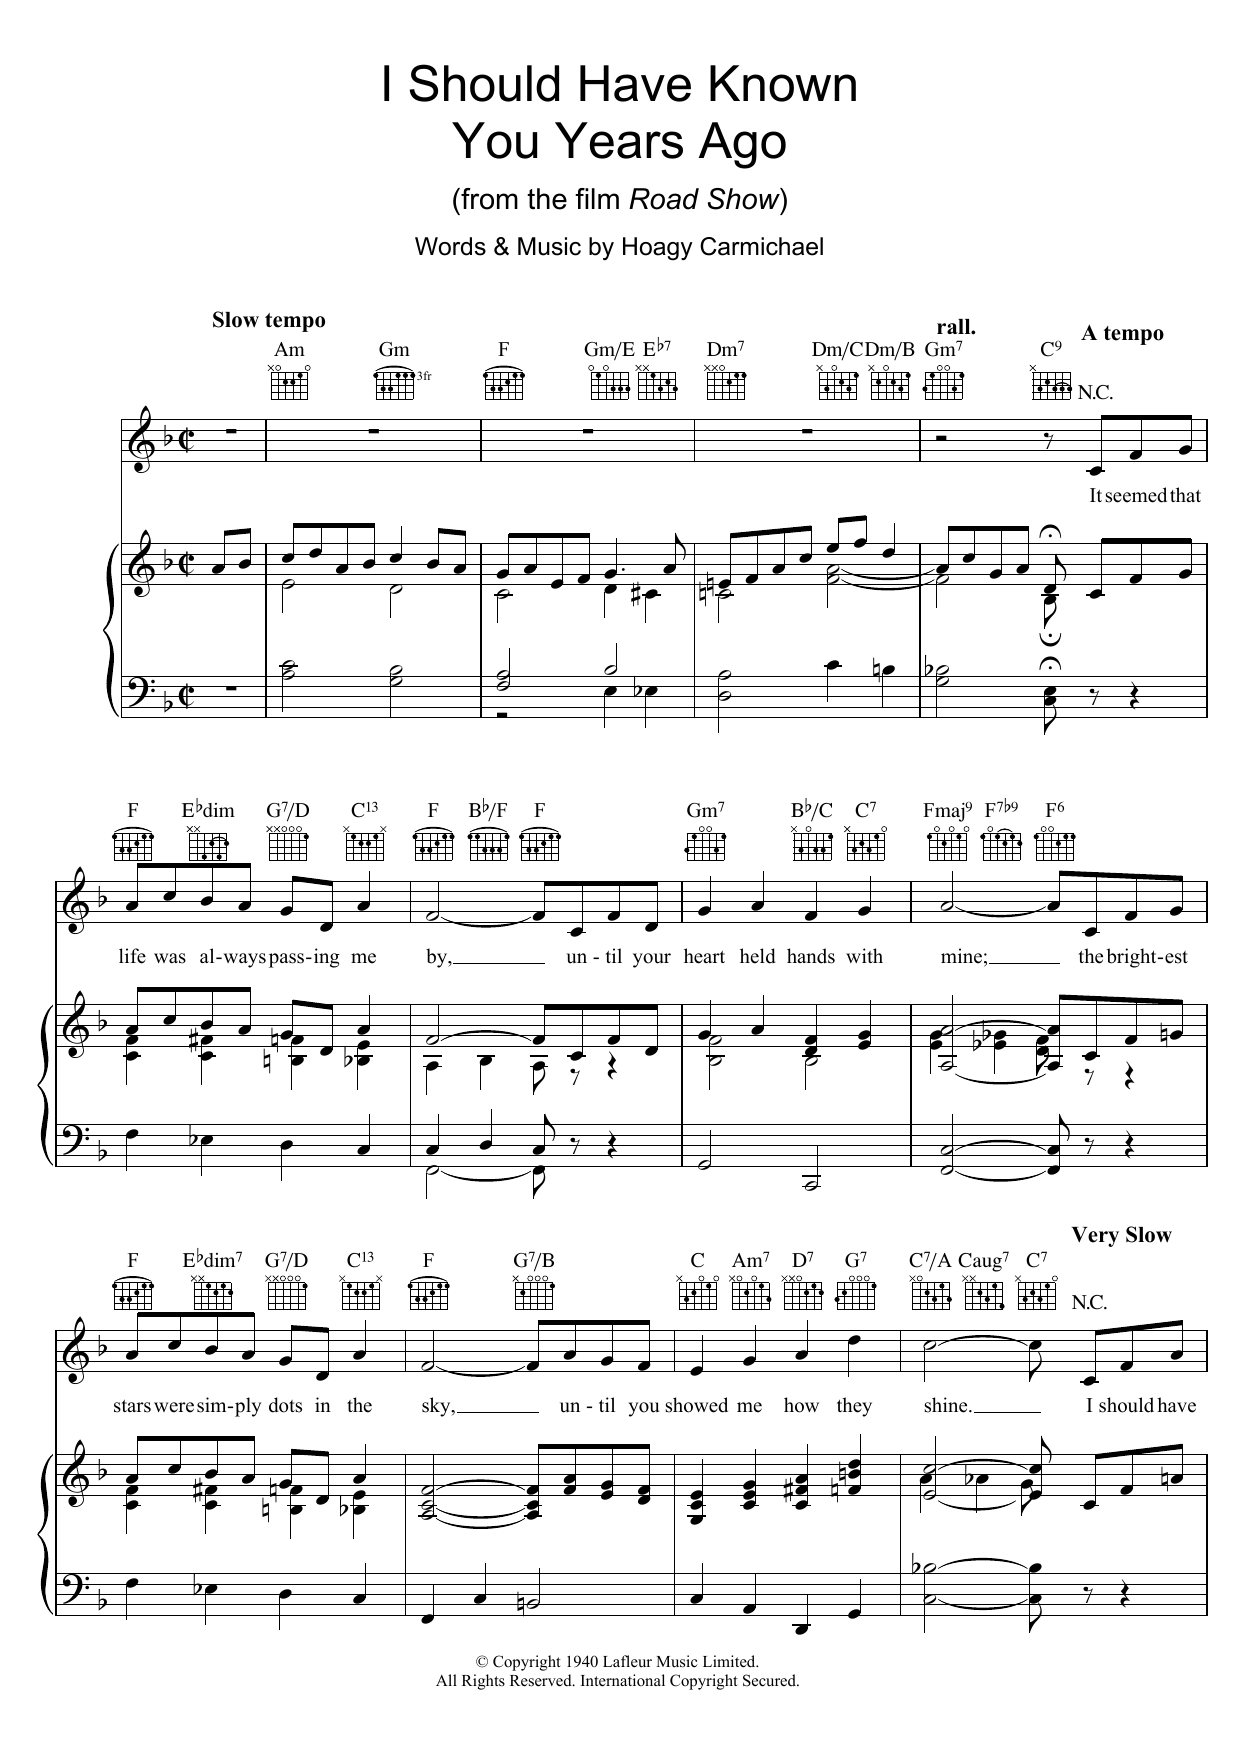 Download Hoagy Carmichael I Should Have Known You Years Ago Sheet Music